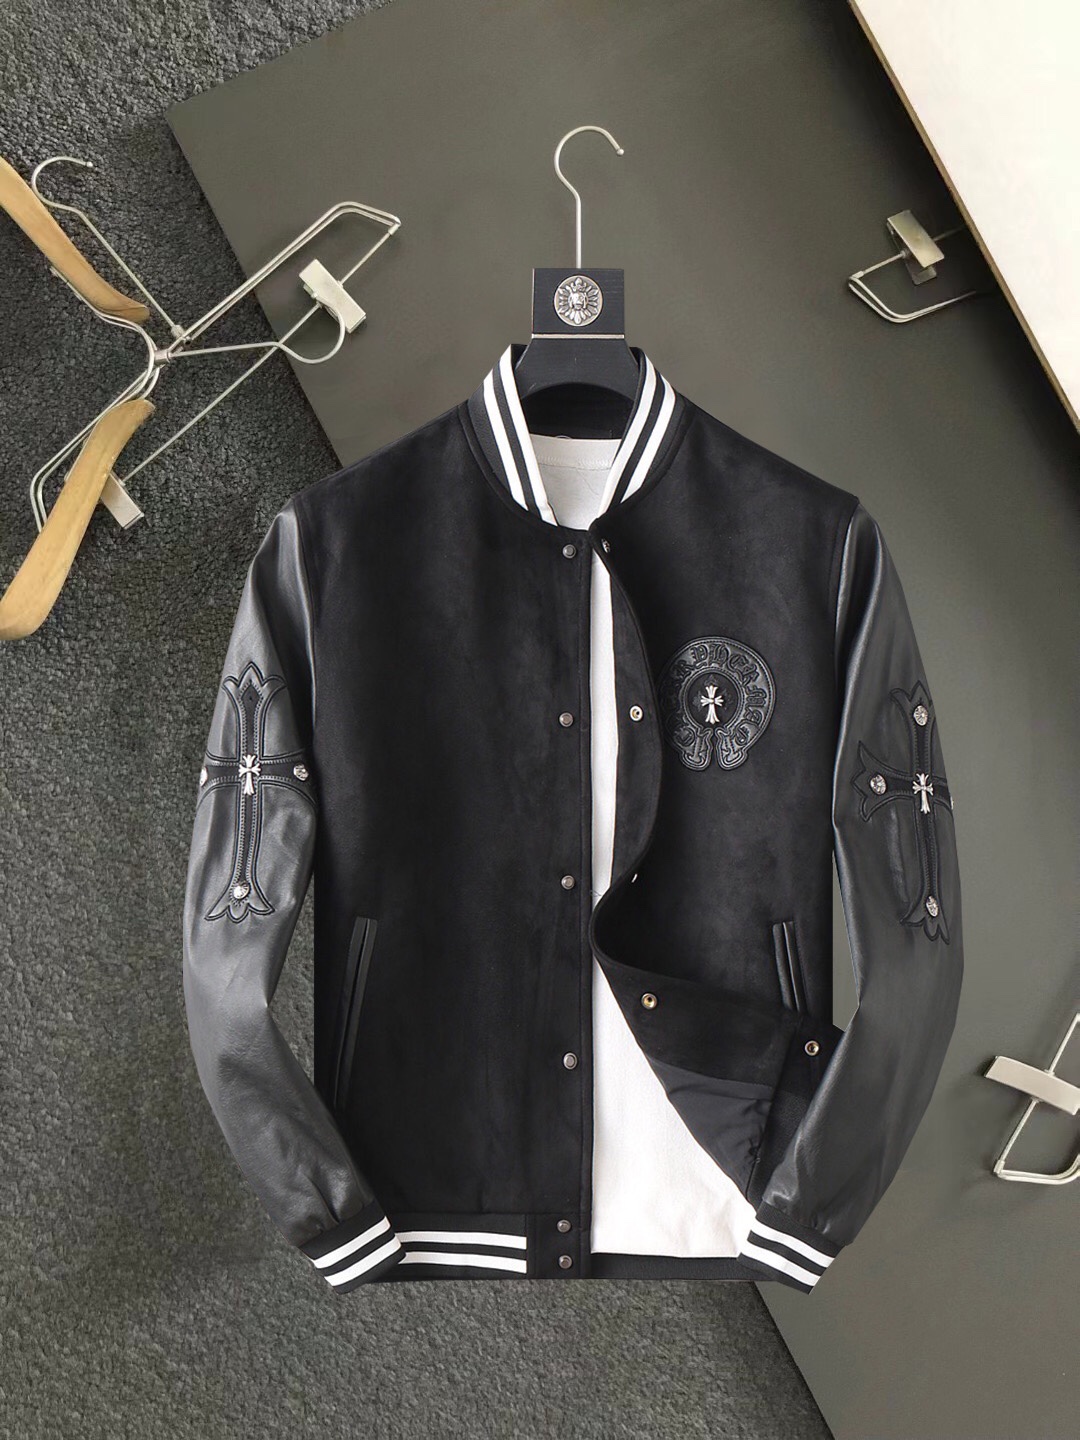 Chrome Hearts Clothing Coats & Jackets Printing Fall/Winter Collection Fashion